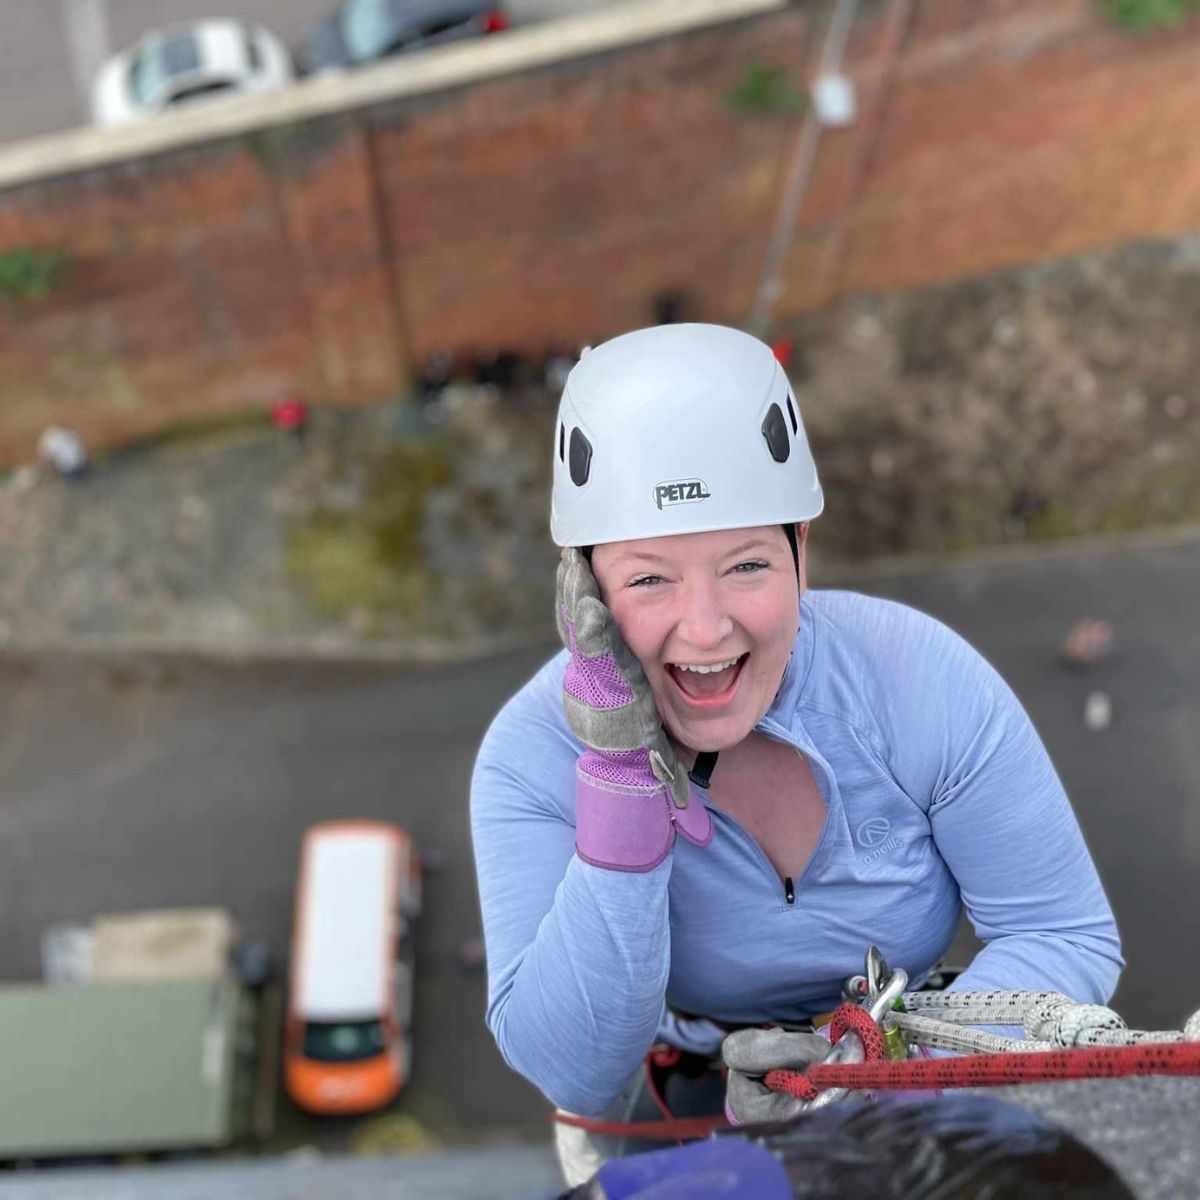 Three of our trainee solicitors, Cleo Brant, Shauntelle Murphy and Mahnoor Butt abseiled down Millenium Point on Saturday to raise money for NICE! In total, they raised £1,254, which will provide life-changing services for disabled children and adults. Well done! #Fundraising